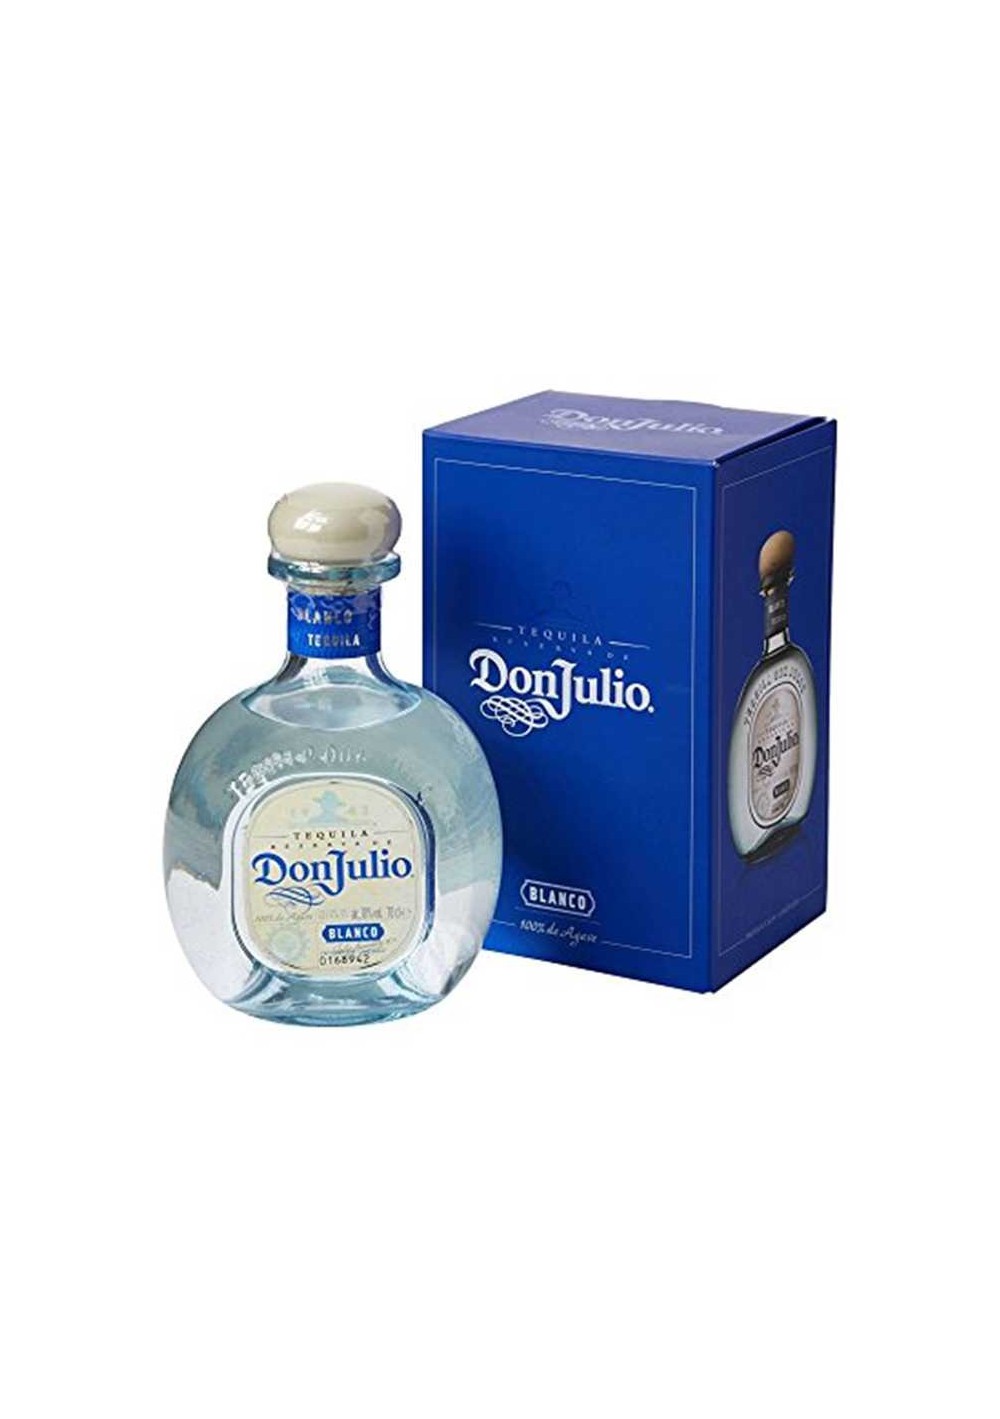 Don Julio - Tequila Blanco - (70cl)